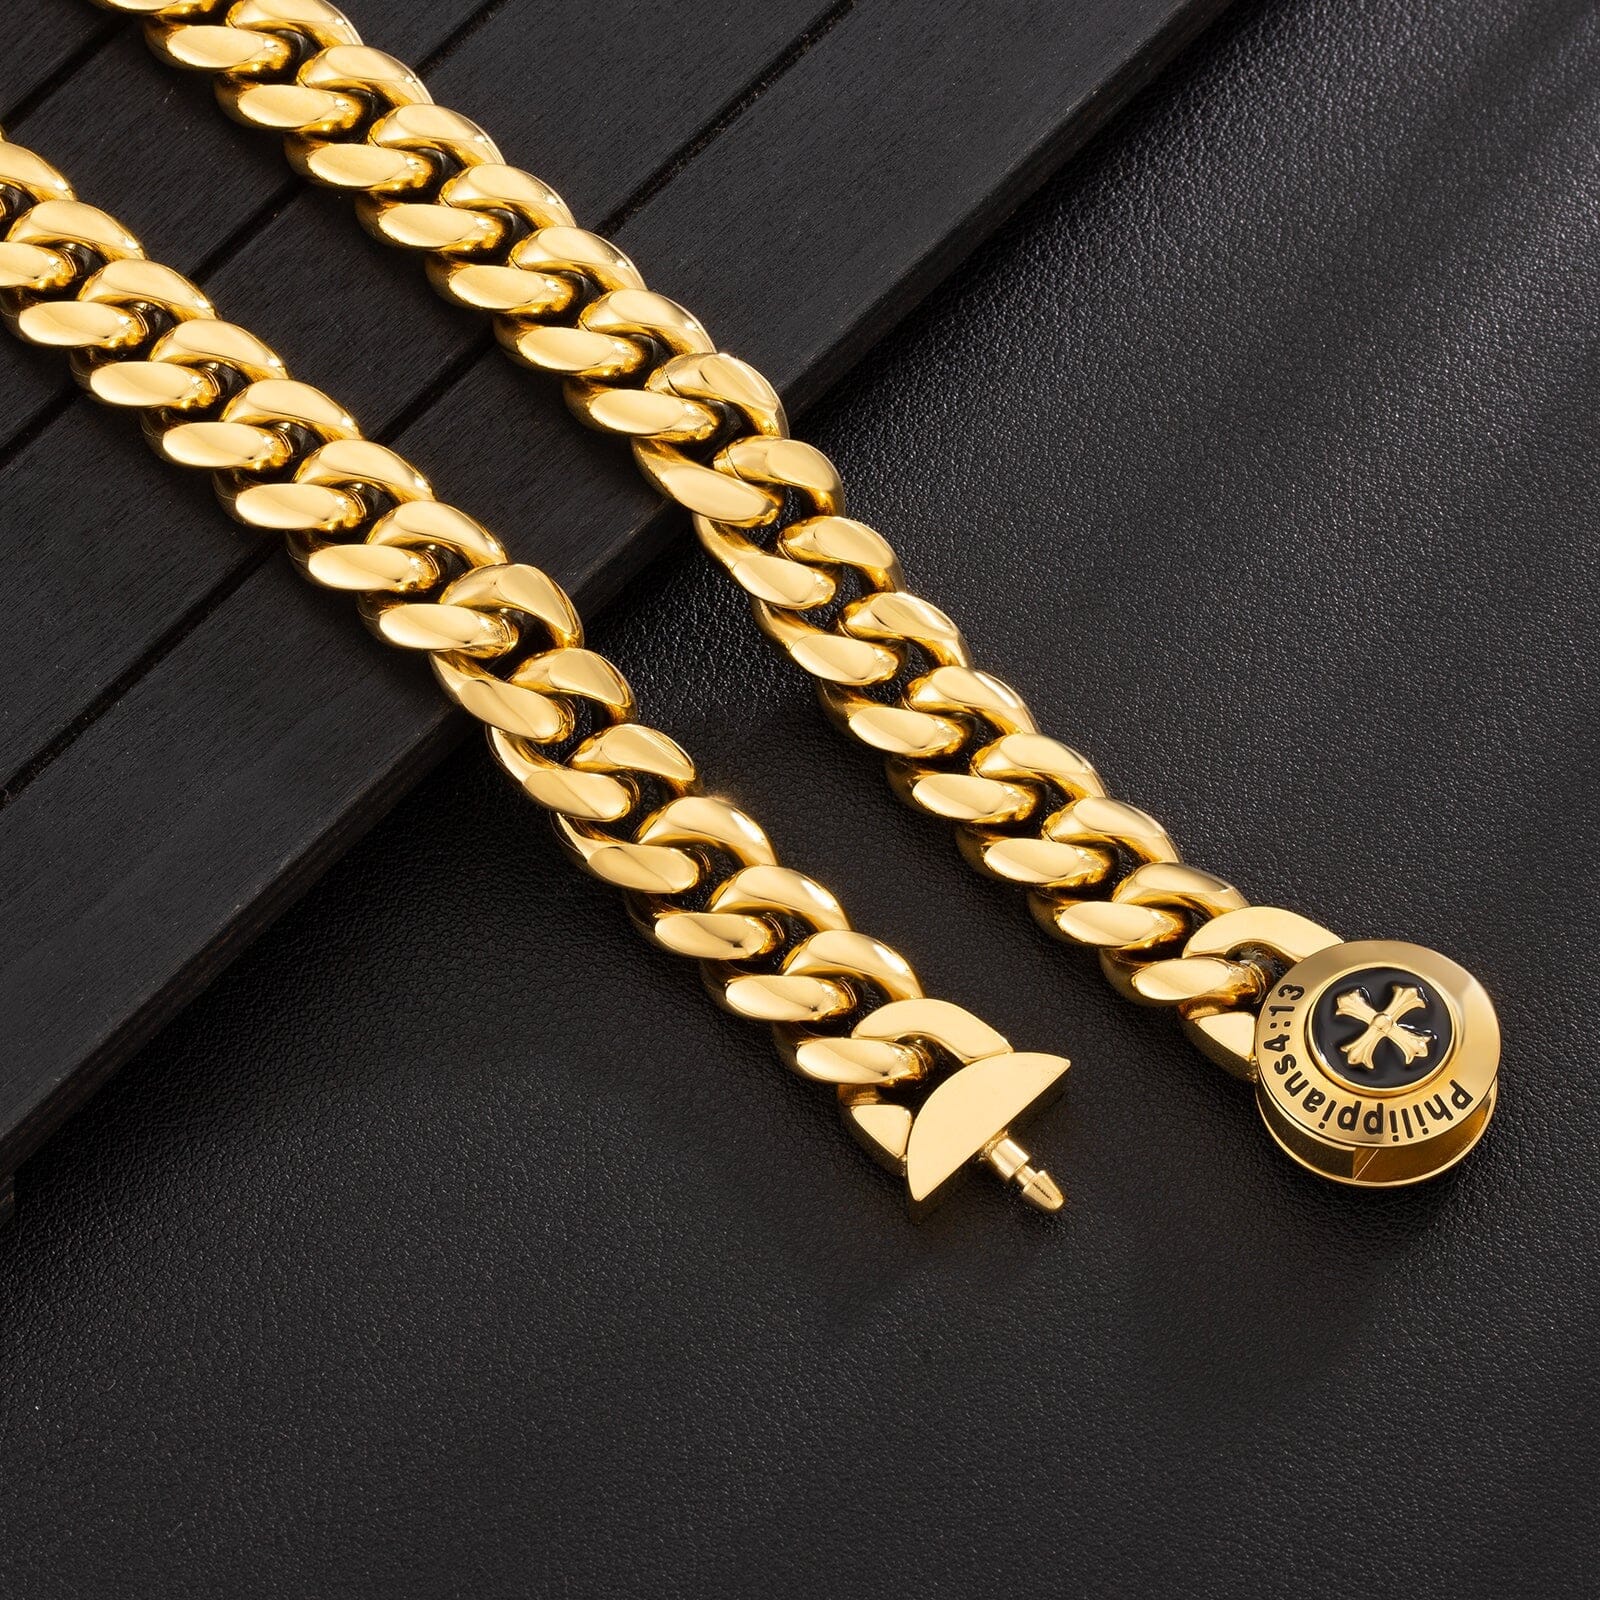 The Strength - 12mm Cuban Link Chain in 18K Gold Plated Necklaces 